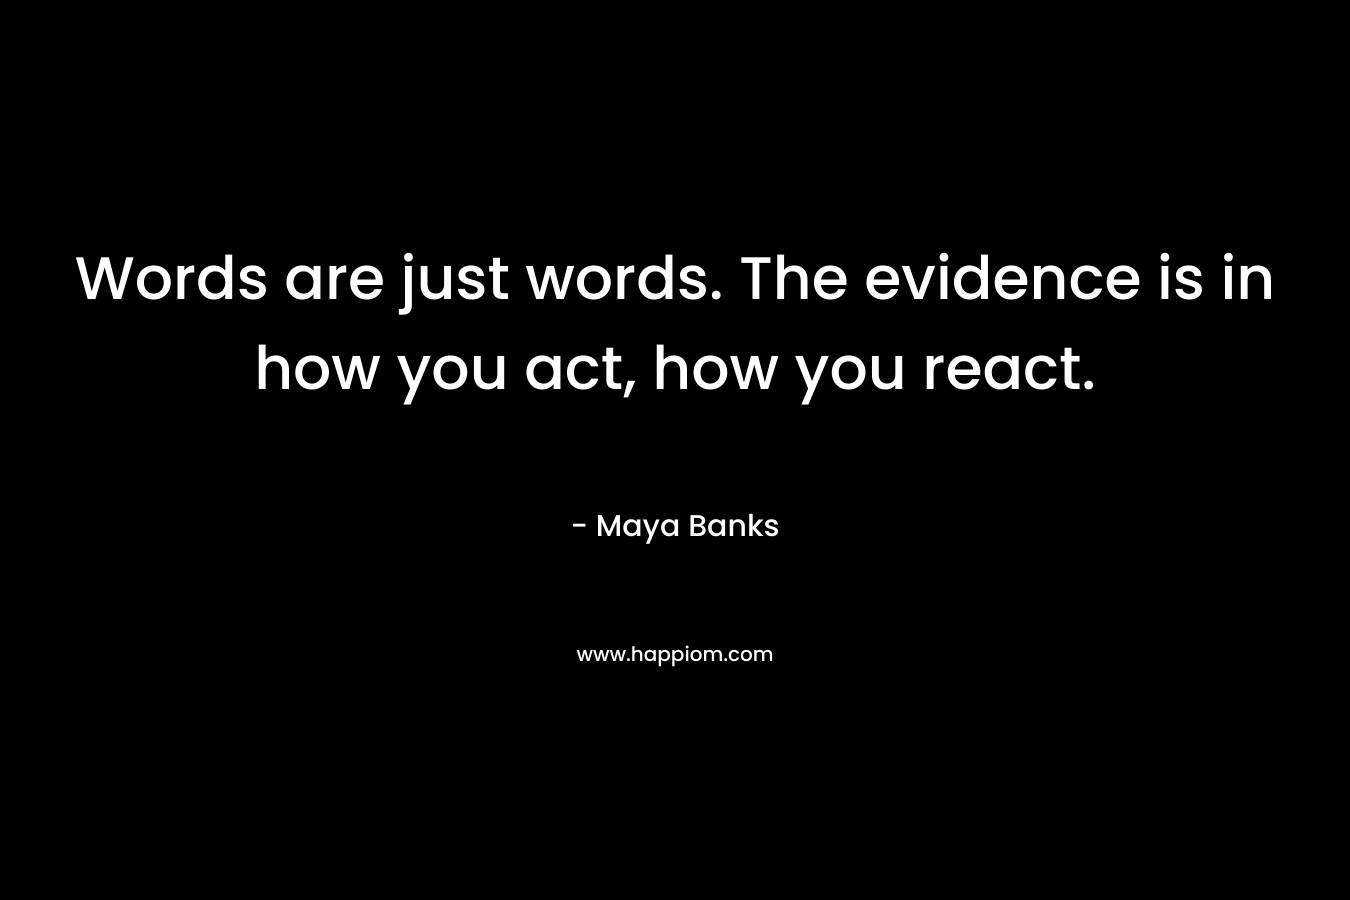 Words are just words. The evidence is in how you act, how you react.